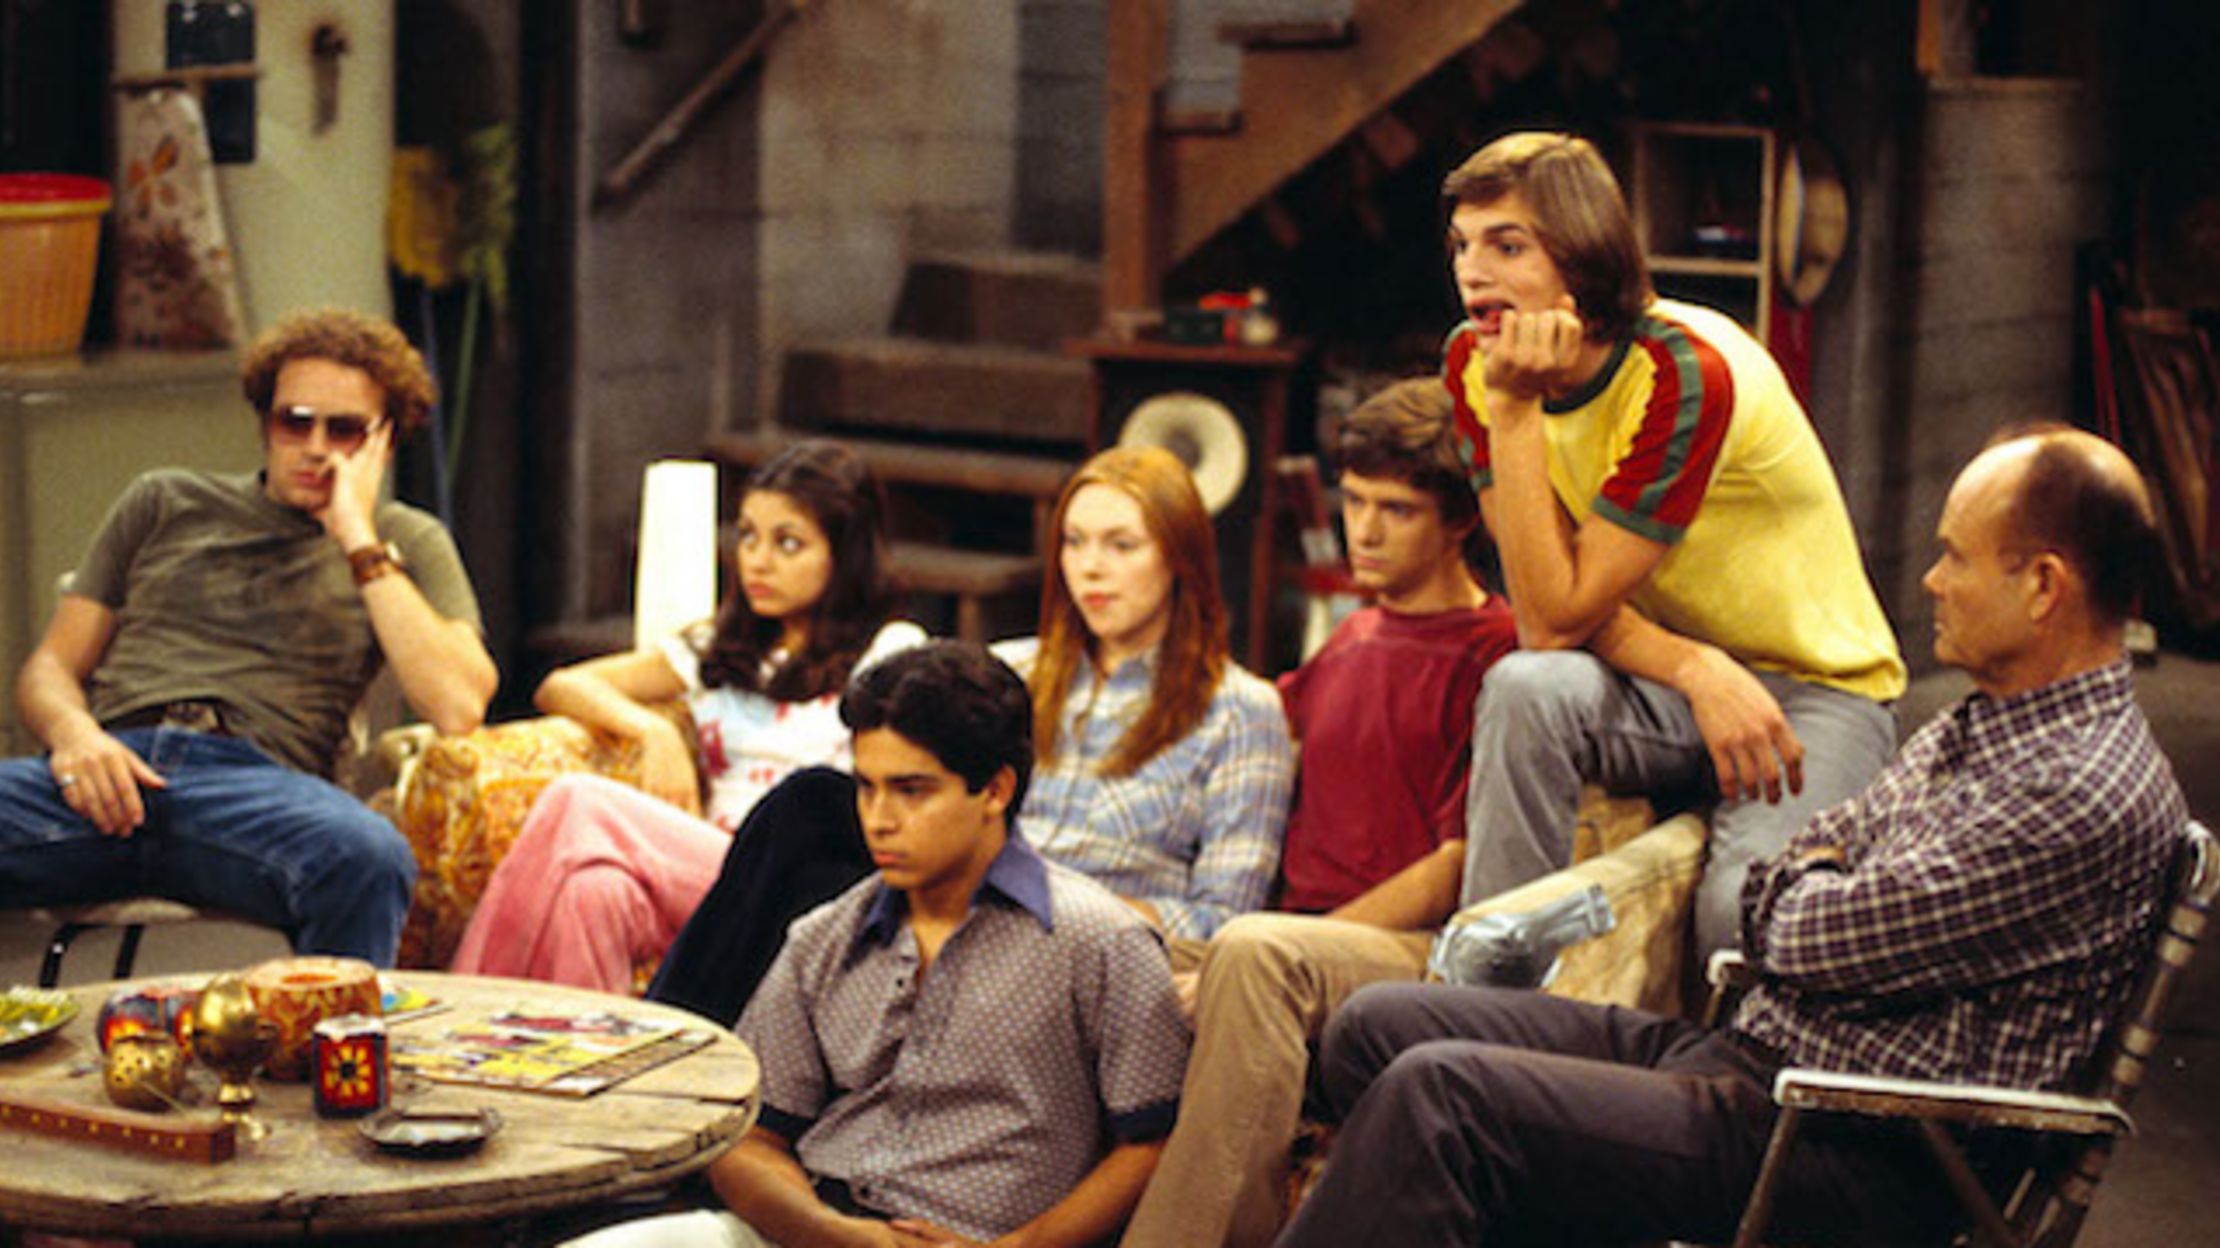 15 Vintage Facts About 'That '70s Show' | Mental Floss